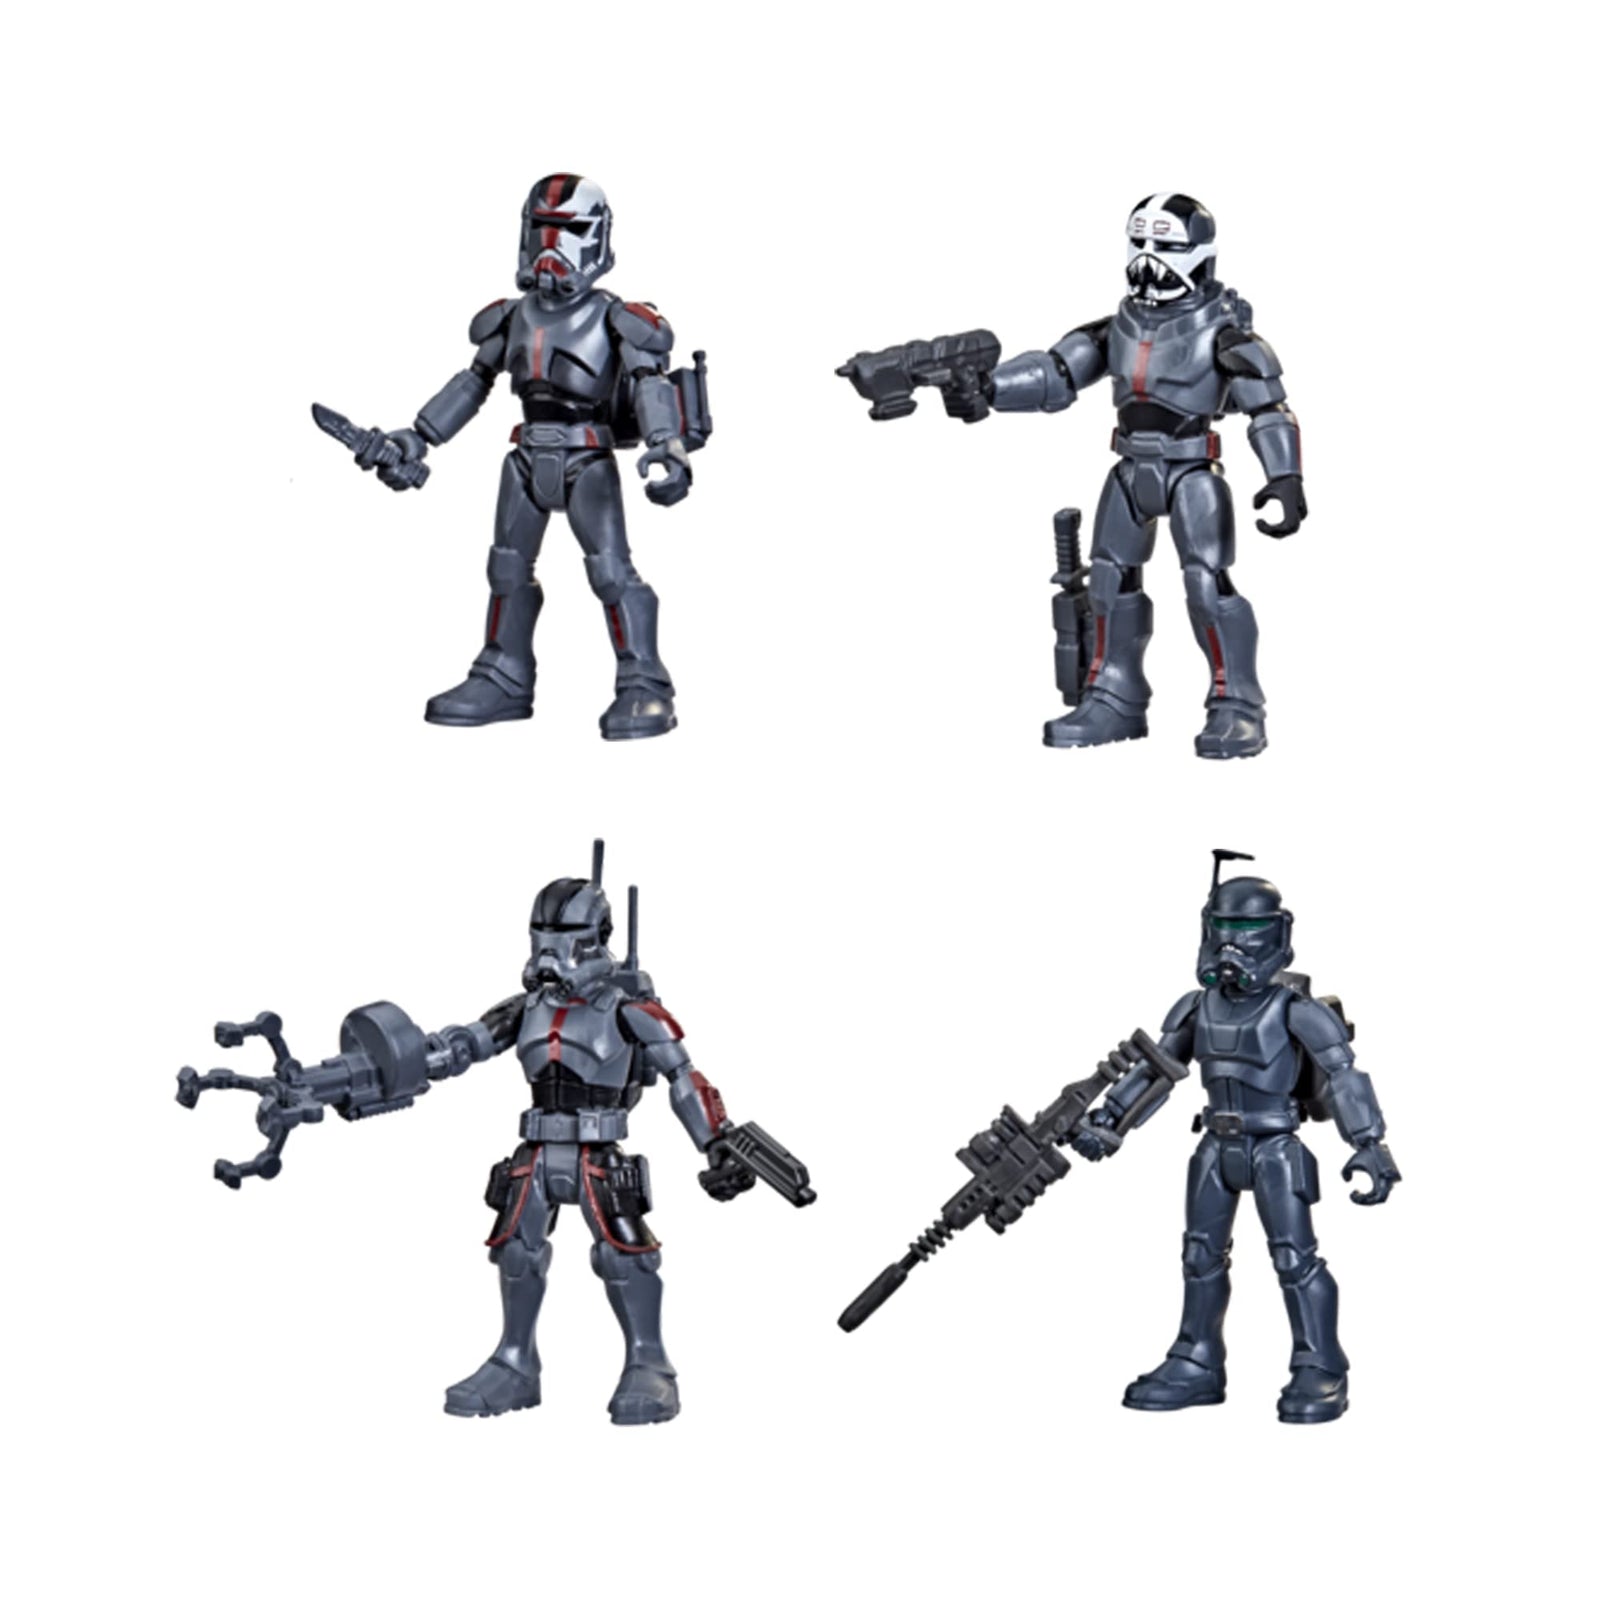 Star Wars Mission Fleet Clone Commando Clash 2.5-Inch-Scale Action Figure 4-Pack with Multiple Accessories, Toys for Kids Ages 4 and Up,F5333